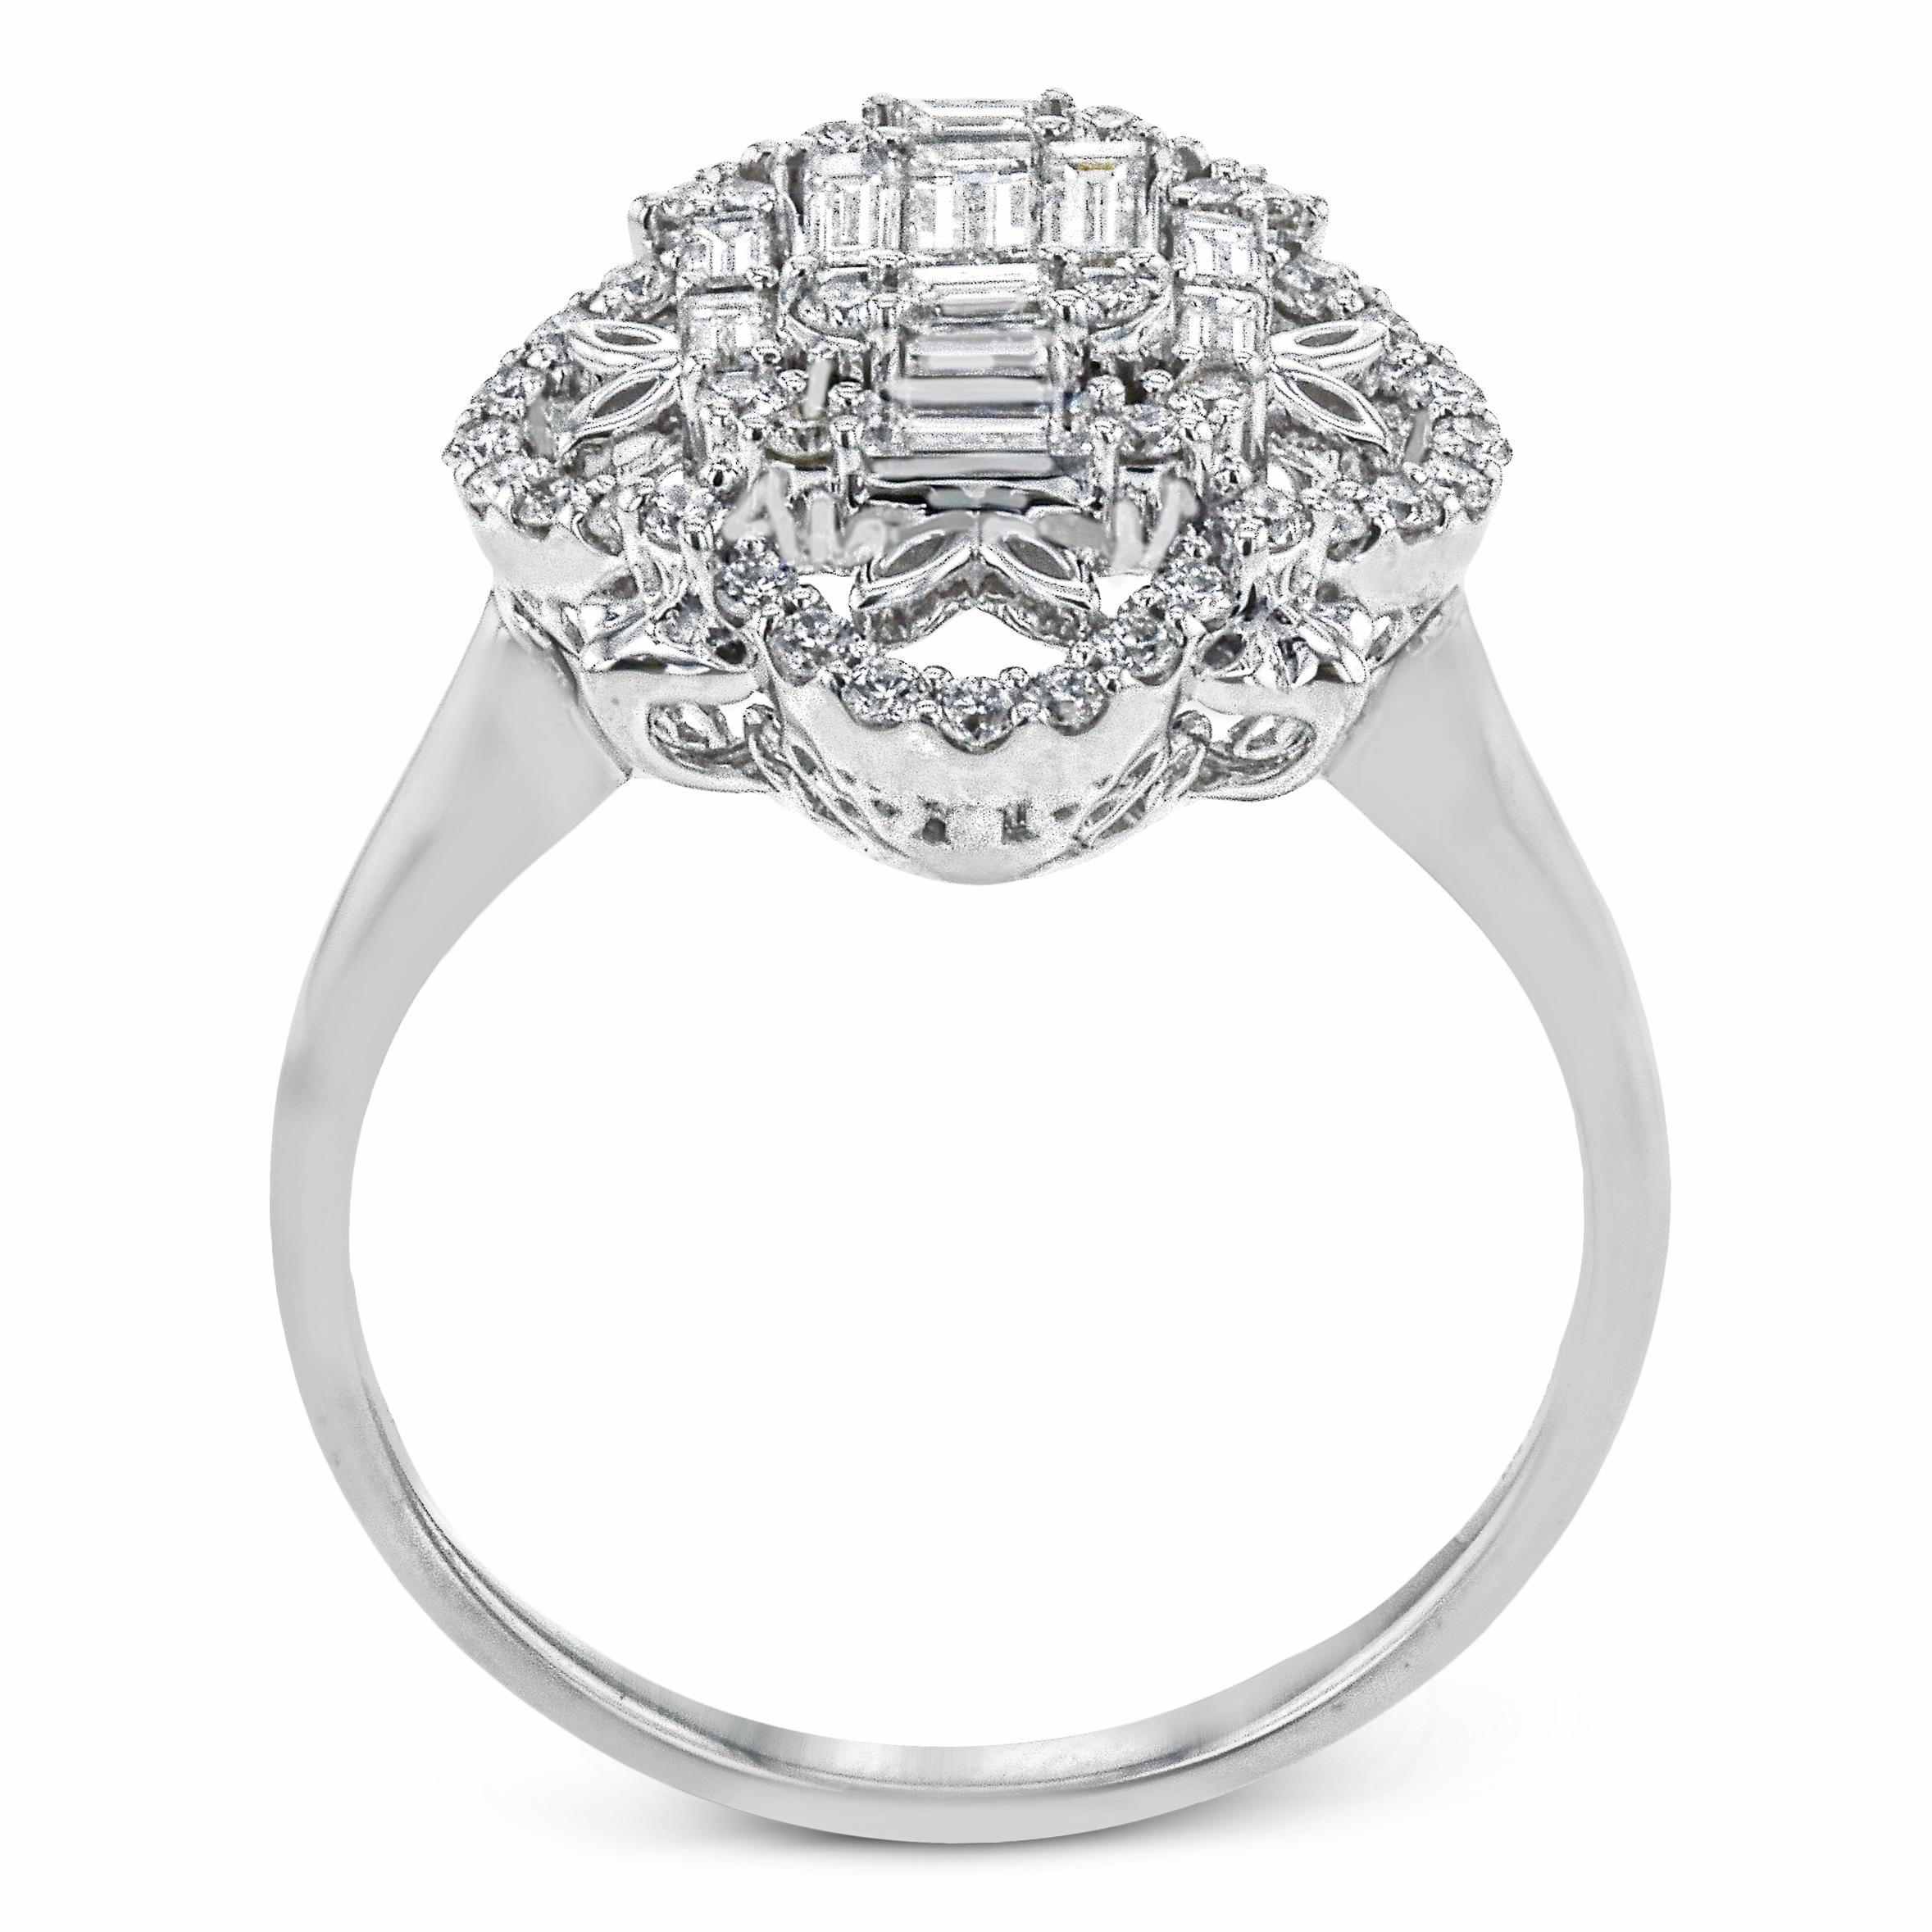 This vintage style fashion ring from Simon G features 0.35 carat total weight in baguette diamonds and 0.32 carat total weight in round brilliant cut diamonds set in 18 karat white gold. This ring is a size 6.25 but can be resized upon request.